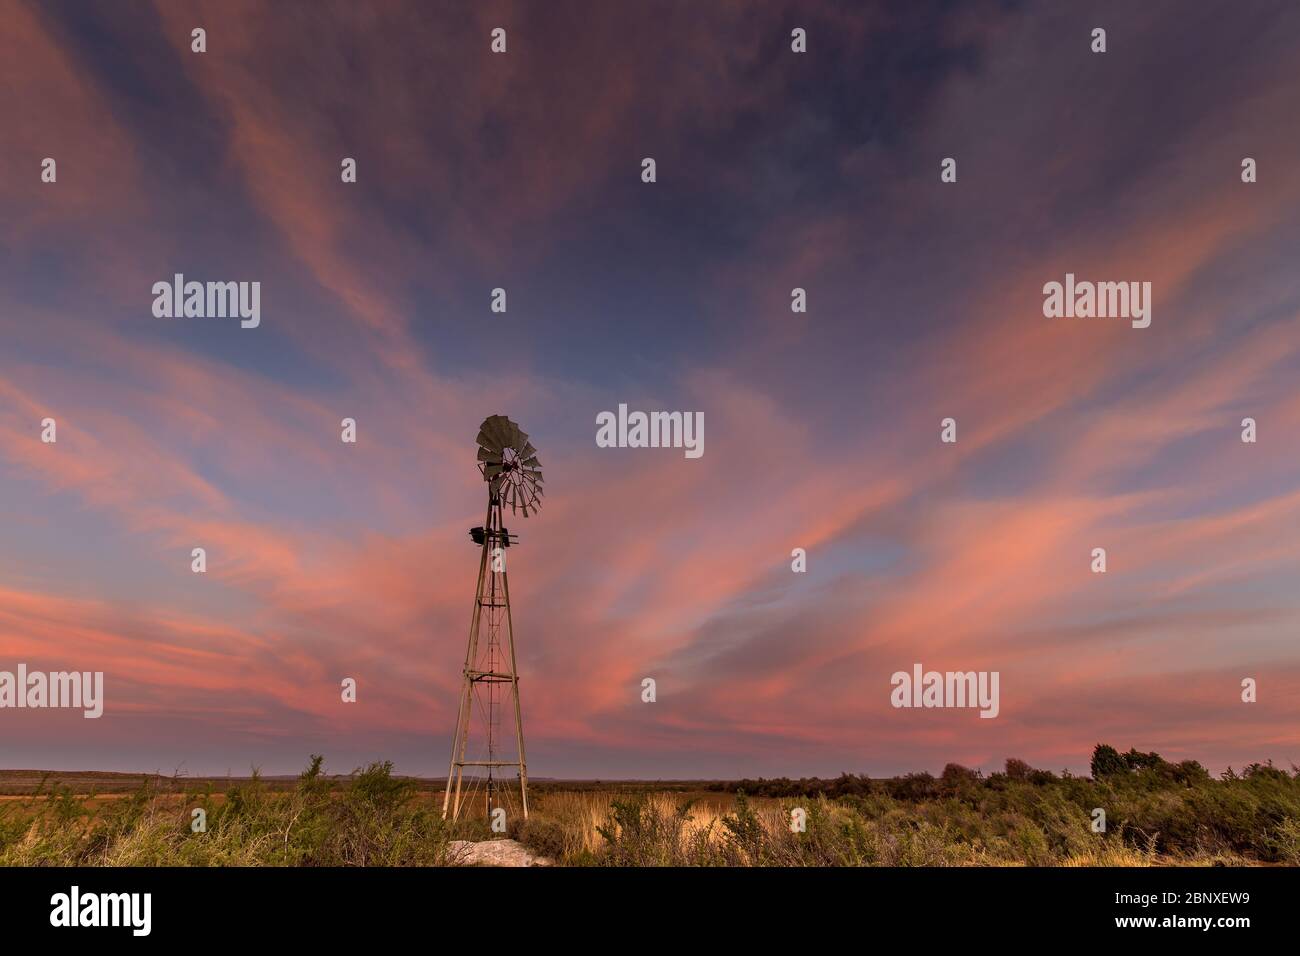 windmill in karoo under pink cloudy sky landscape Stock Photo